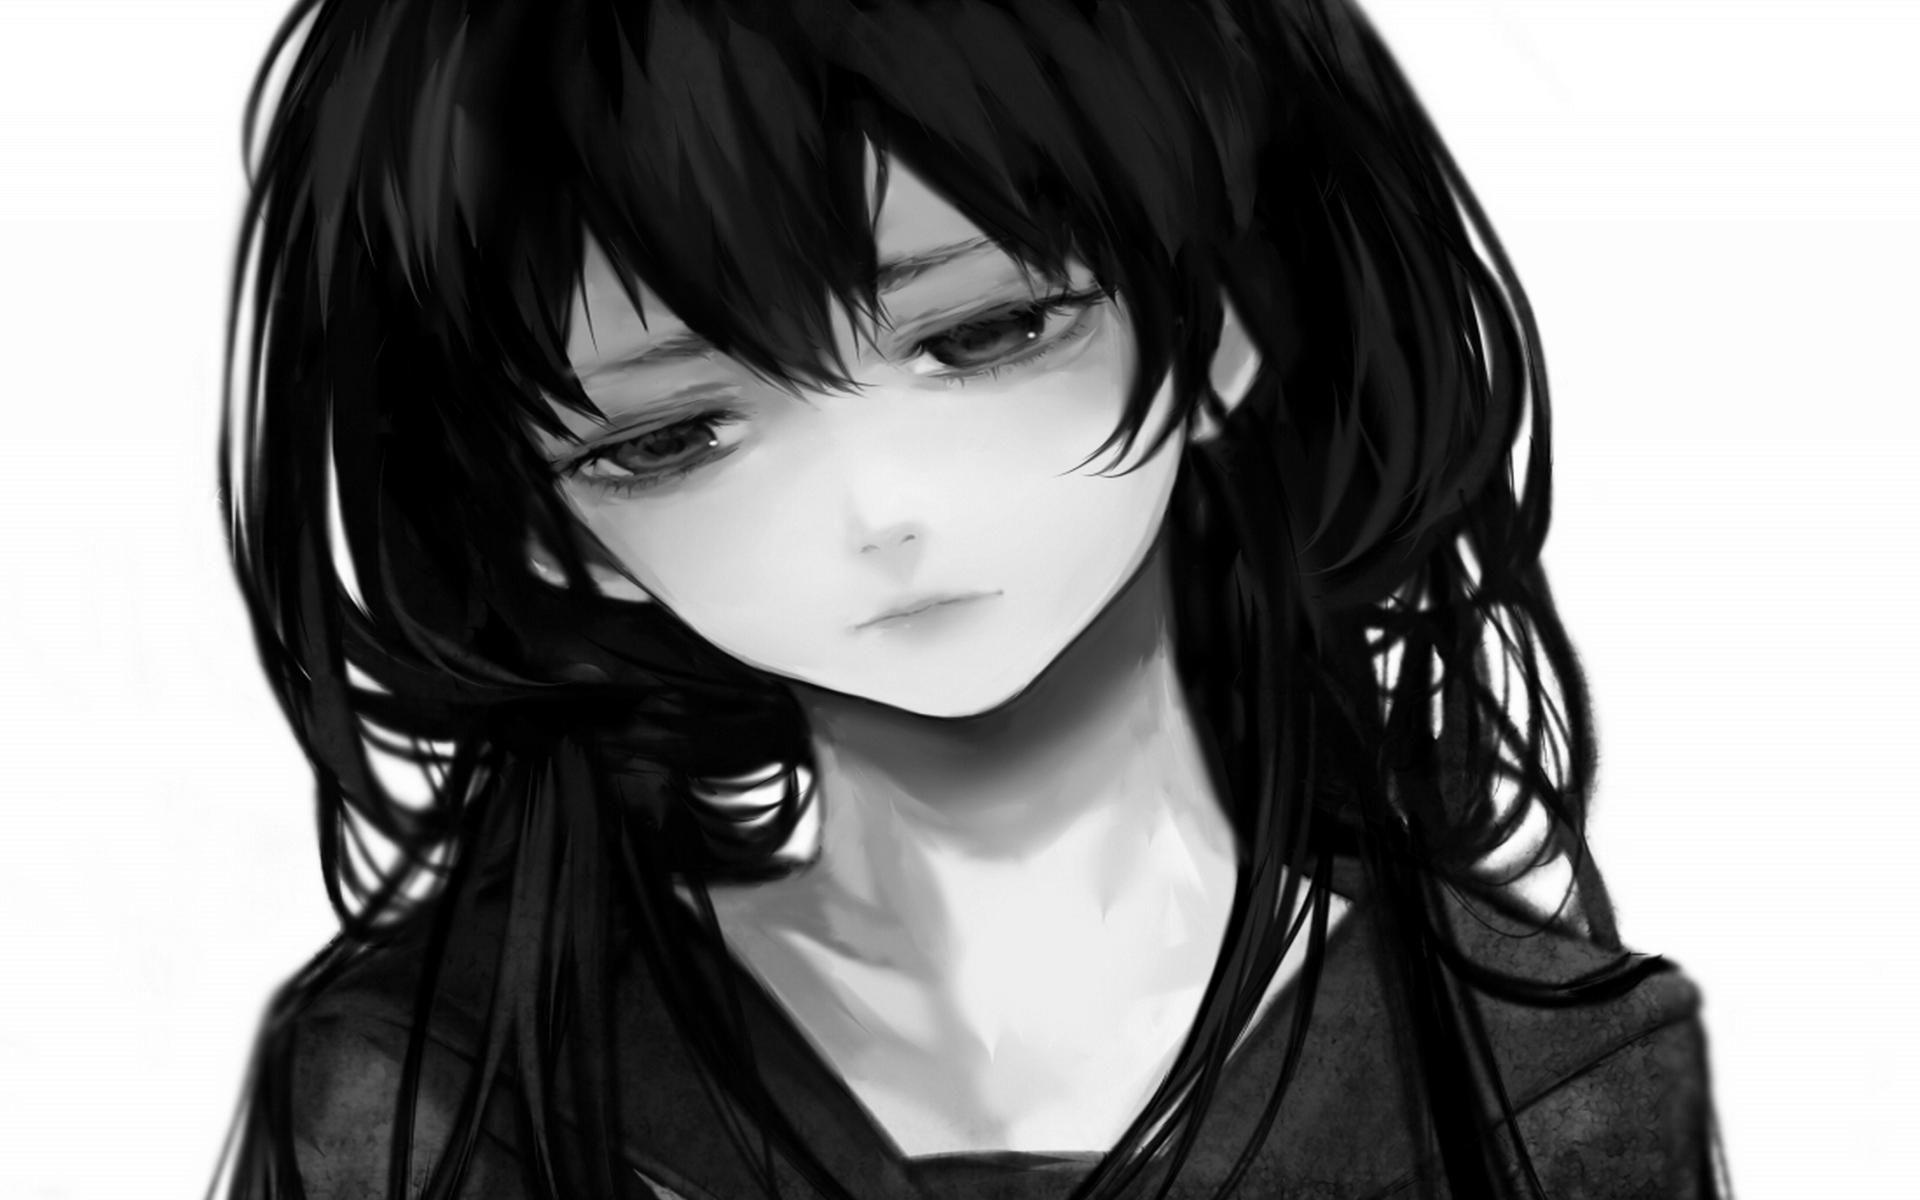 Sad Anime Girl Black and White Wallpapers Boots For Women